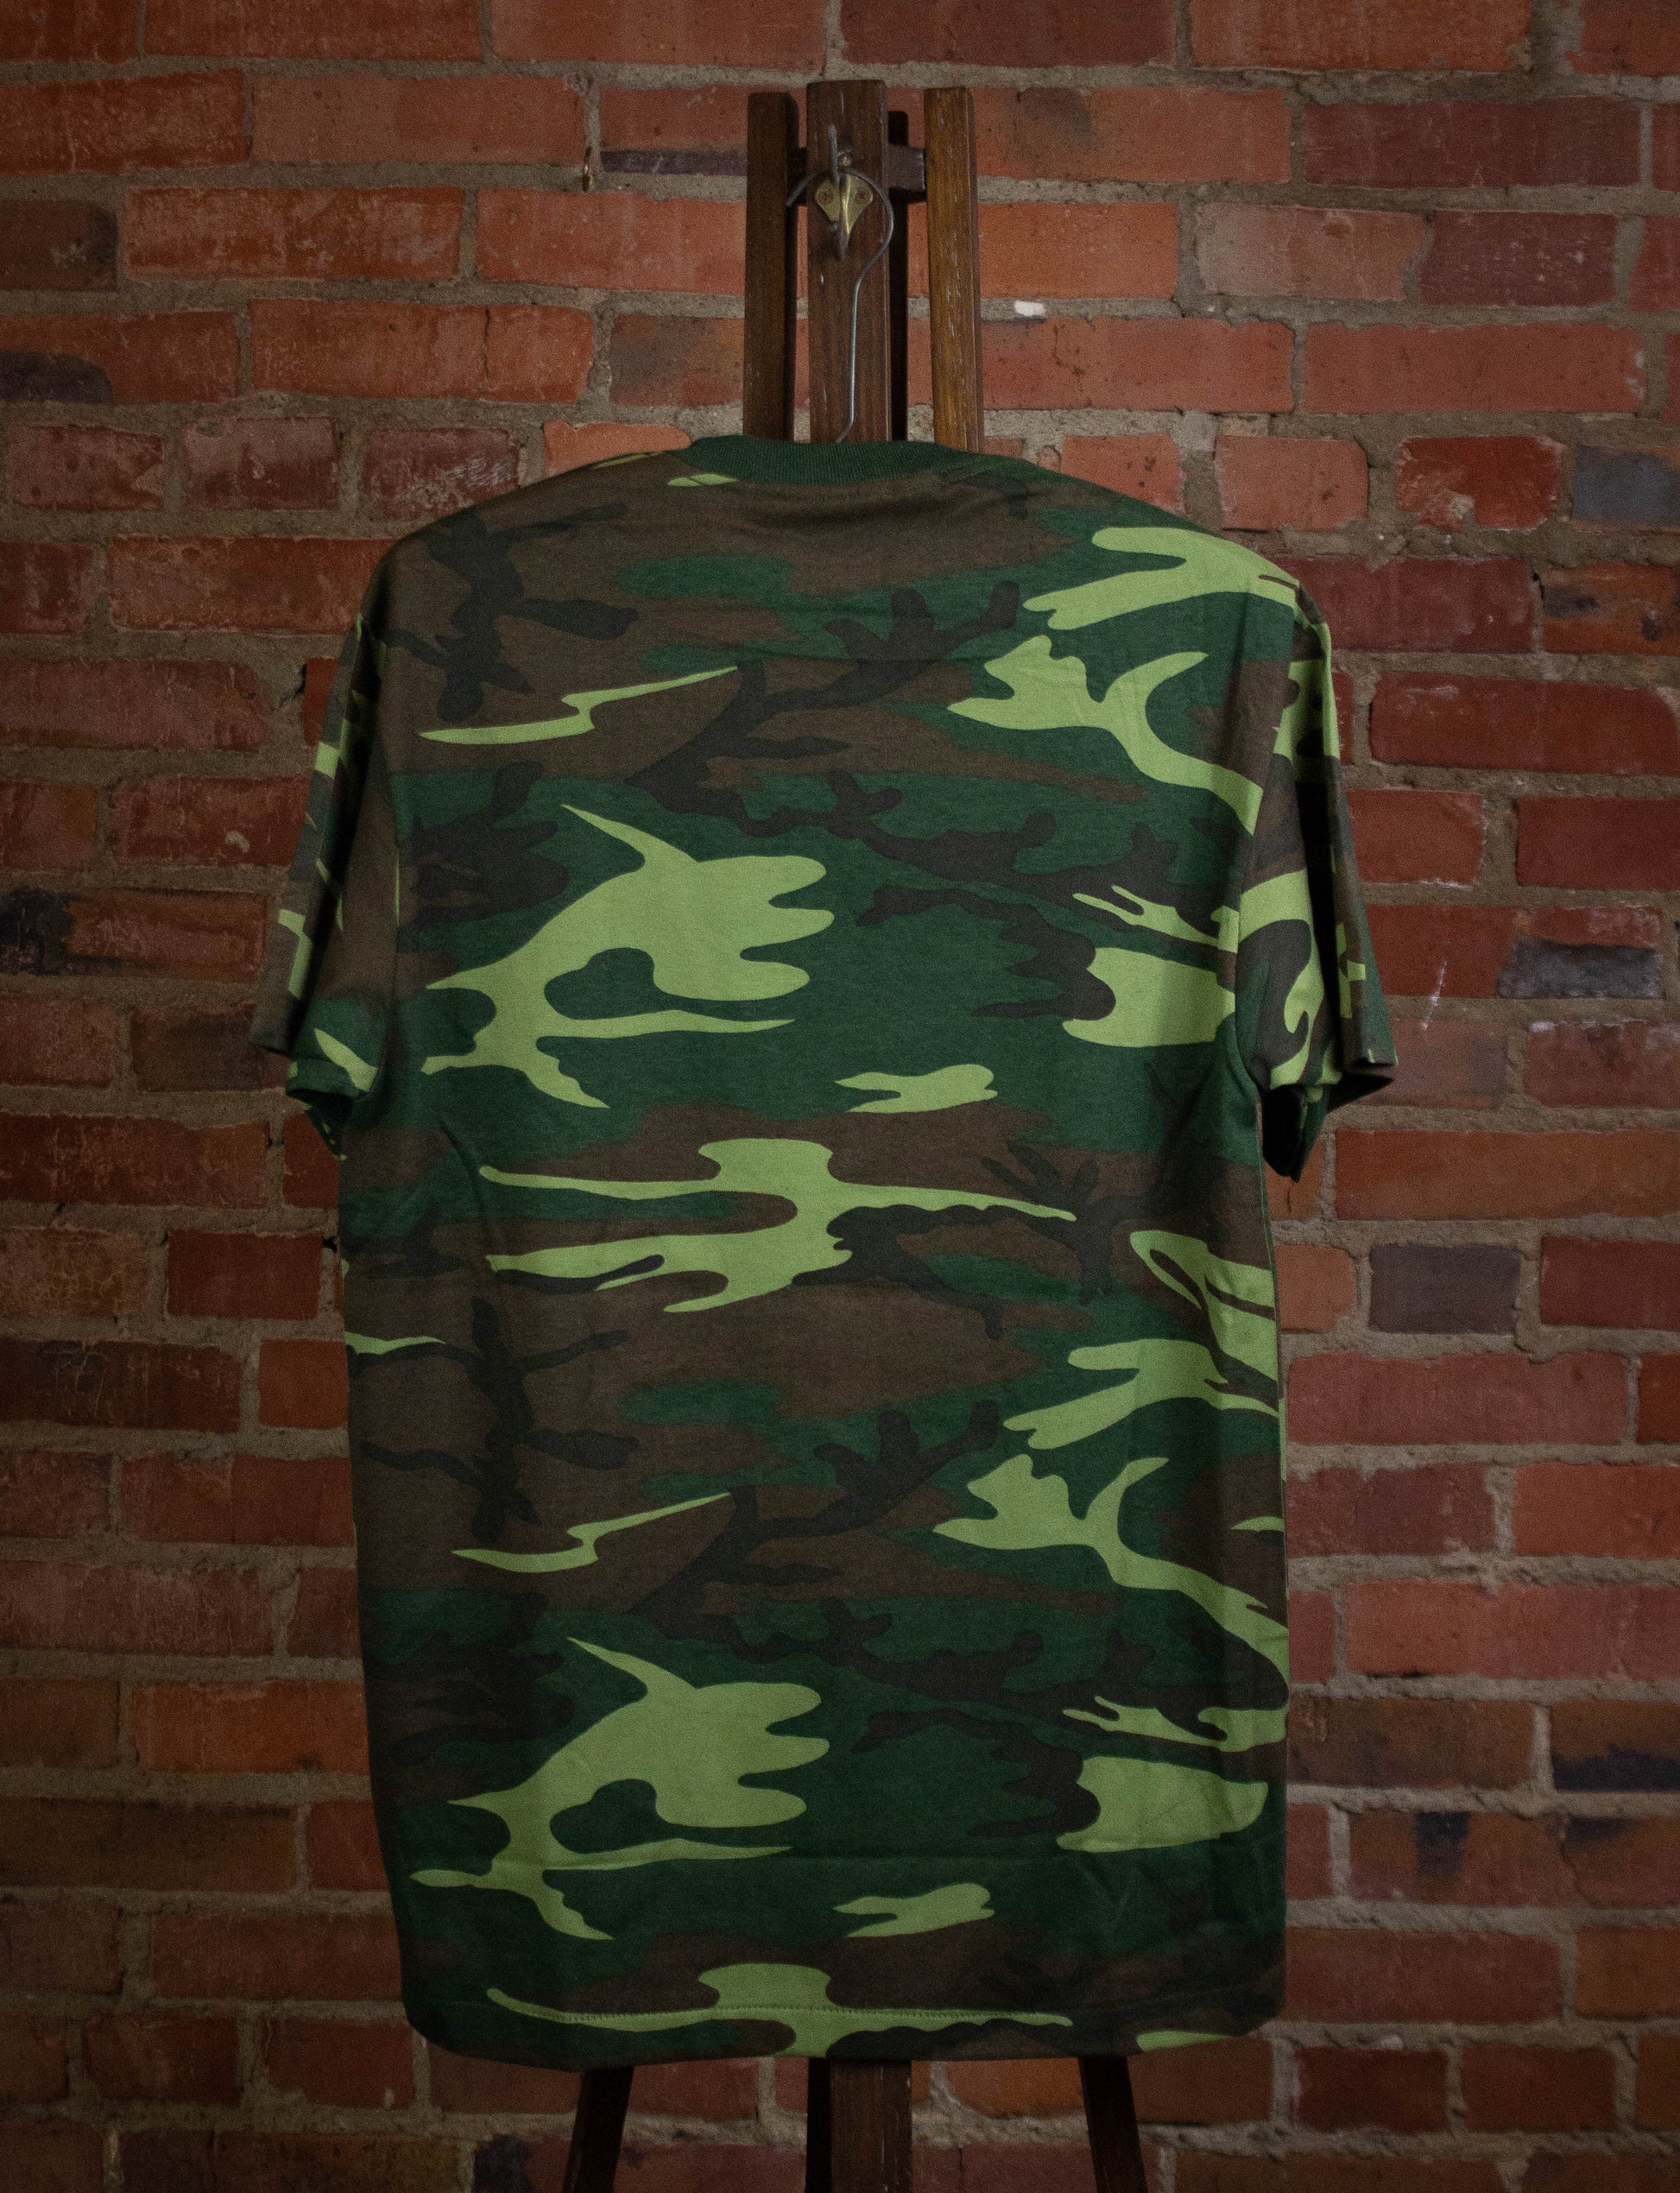 Stop Fucking The Planet T Shirt Camo Large